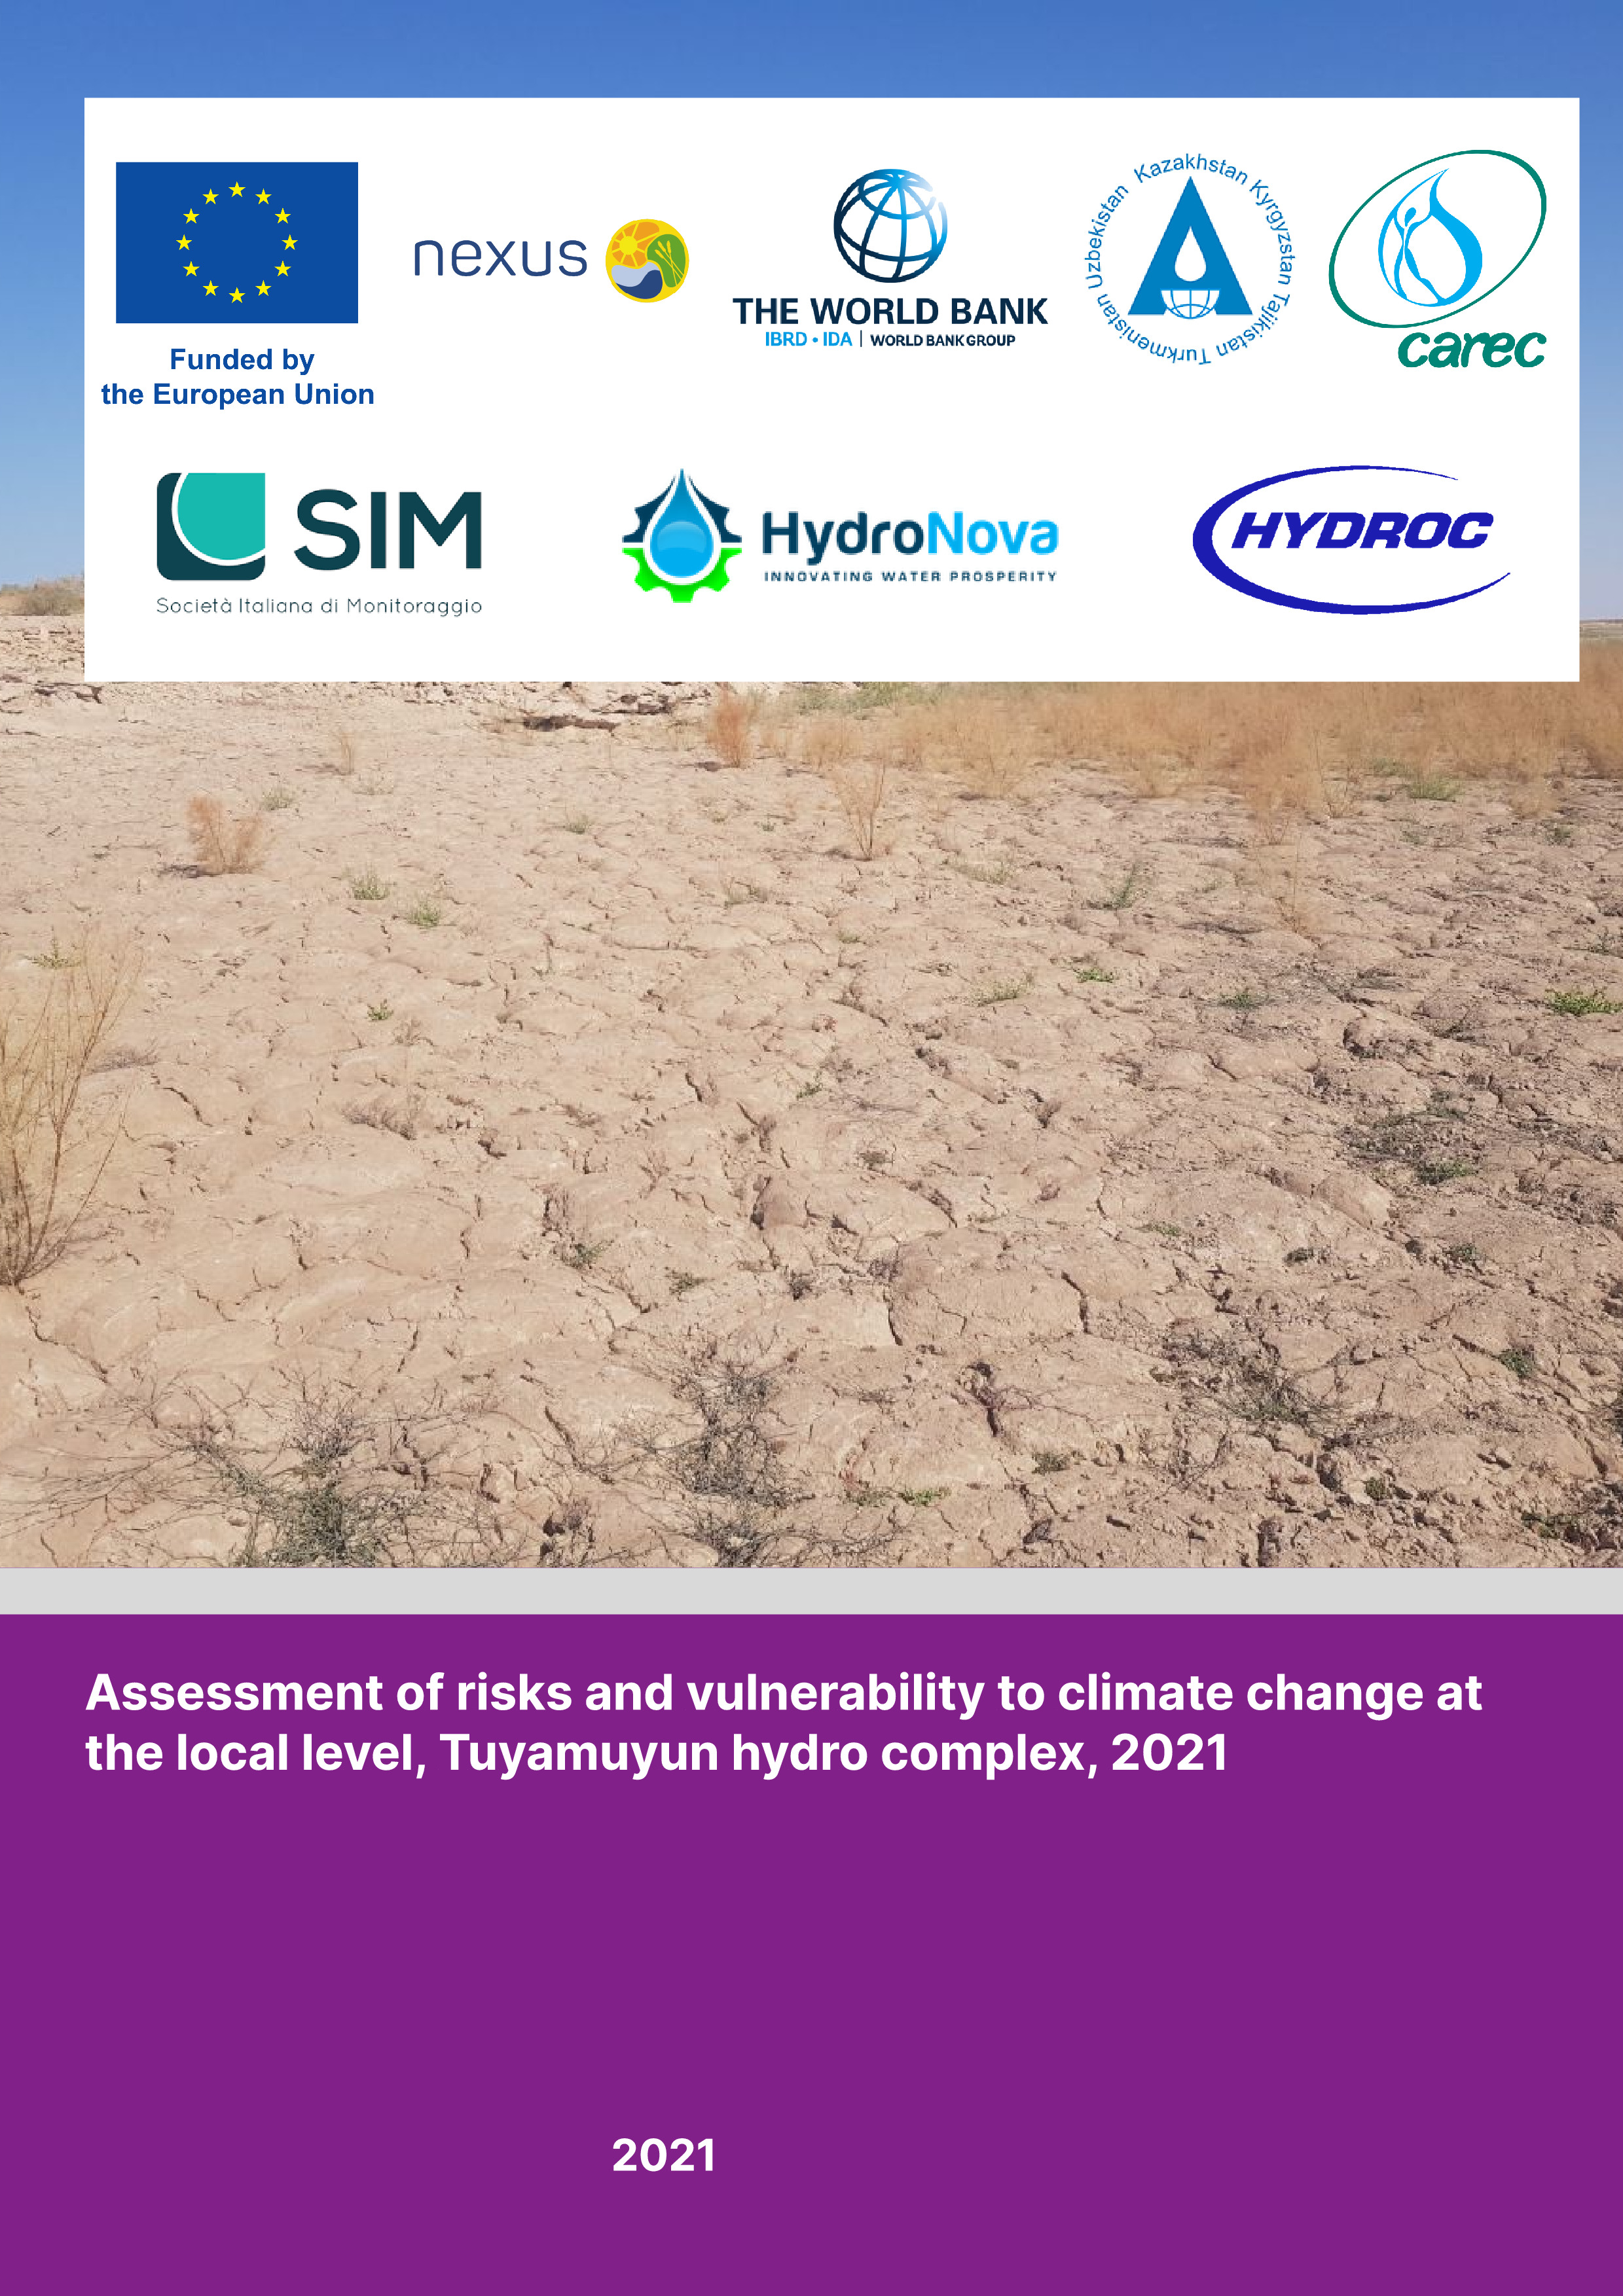 Assessment of risks and vulnerability to climate change at the local level, Tuyamuyun hydro complex, 2021 | G.Petersen, R.Bosch, D.Dyadin, C.Constantin